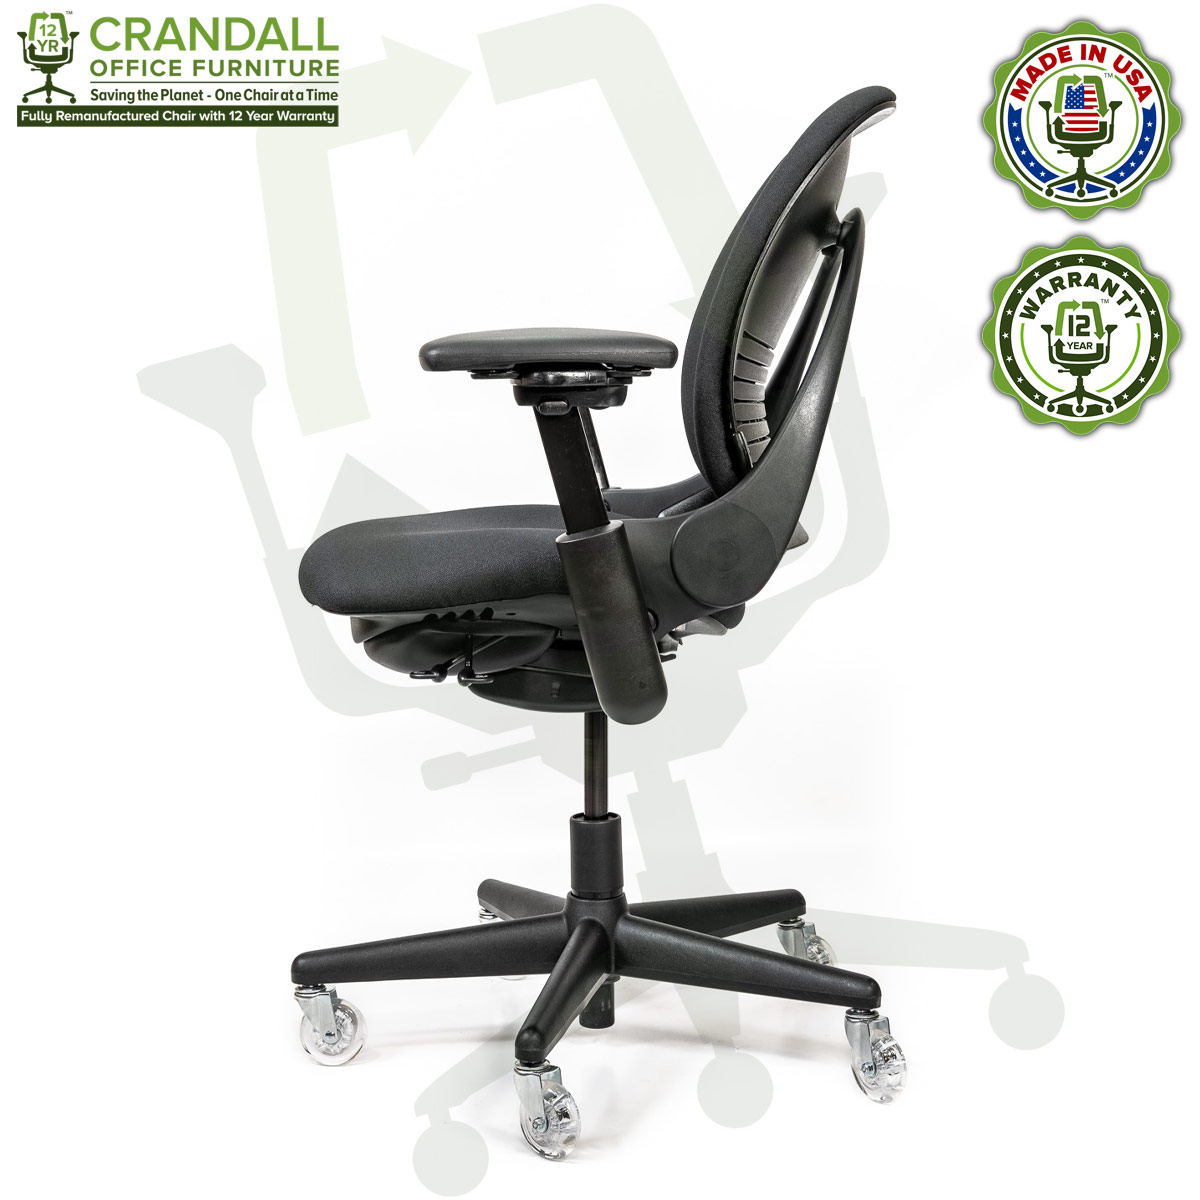 Crandall Office Furniture Remanufactured Steelcase V1 Leap Chair with 12 Year Warranty - Arch Back - 03